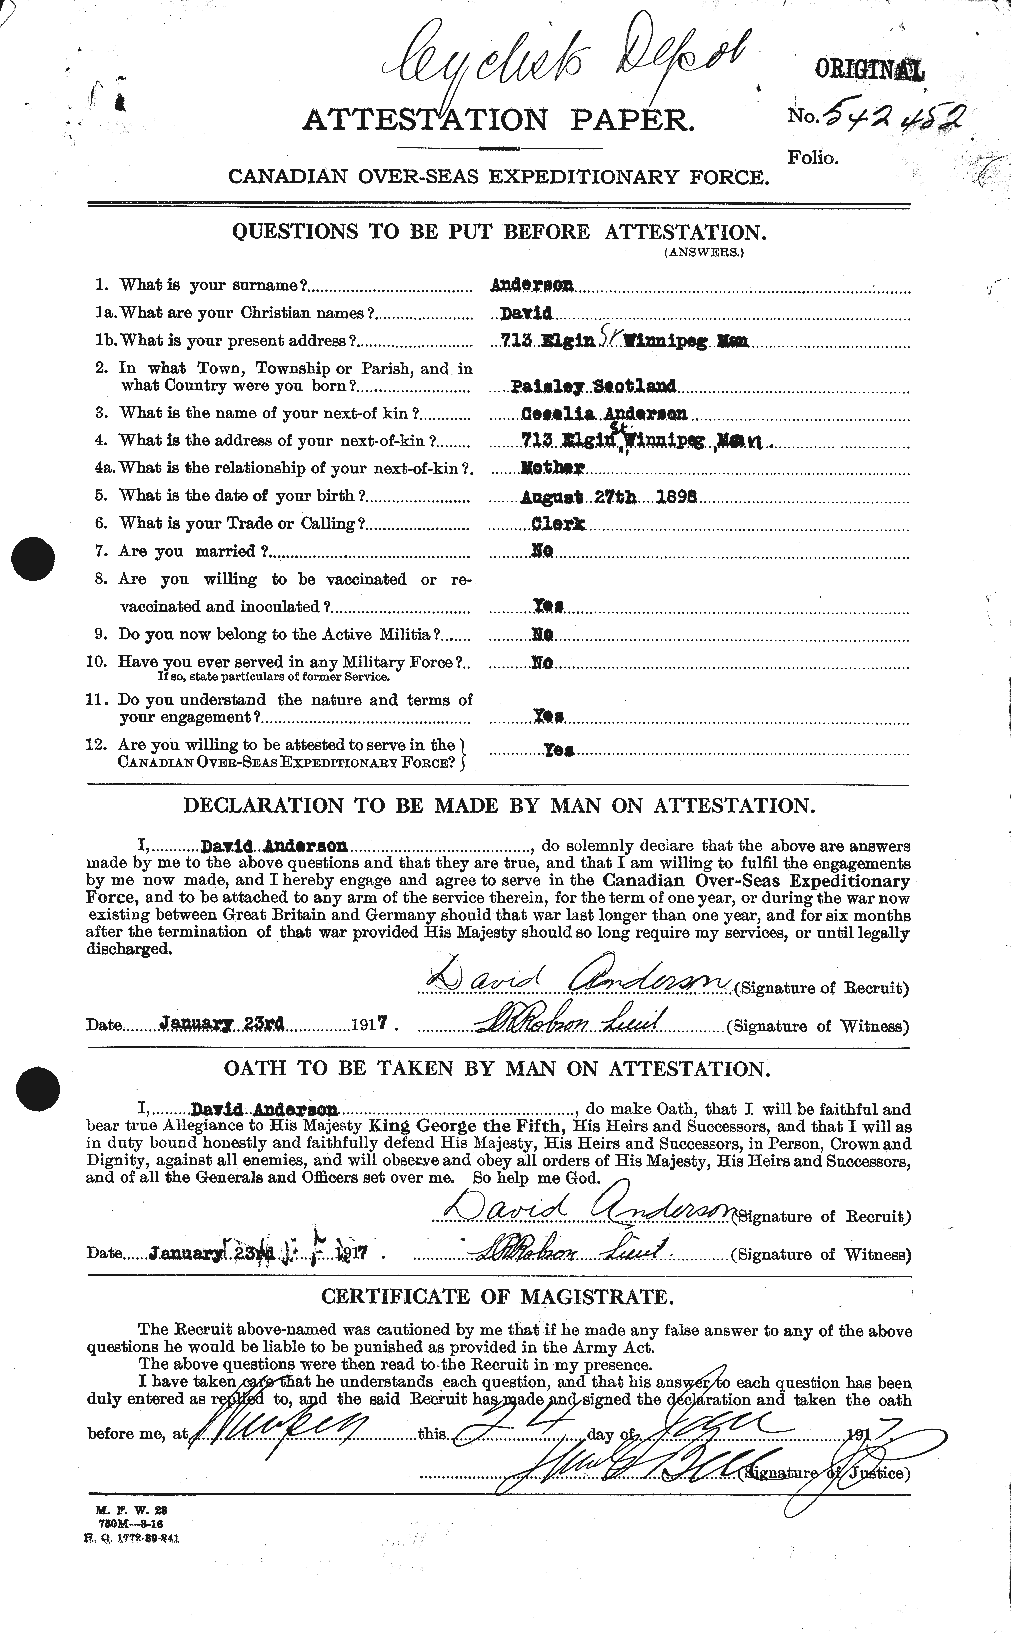 Personnel Records of the First World War - CEF 210029a